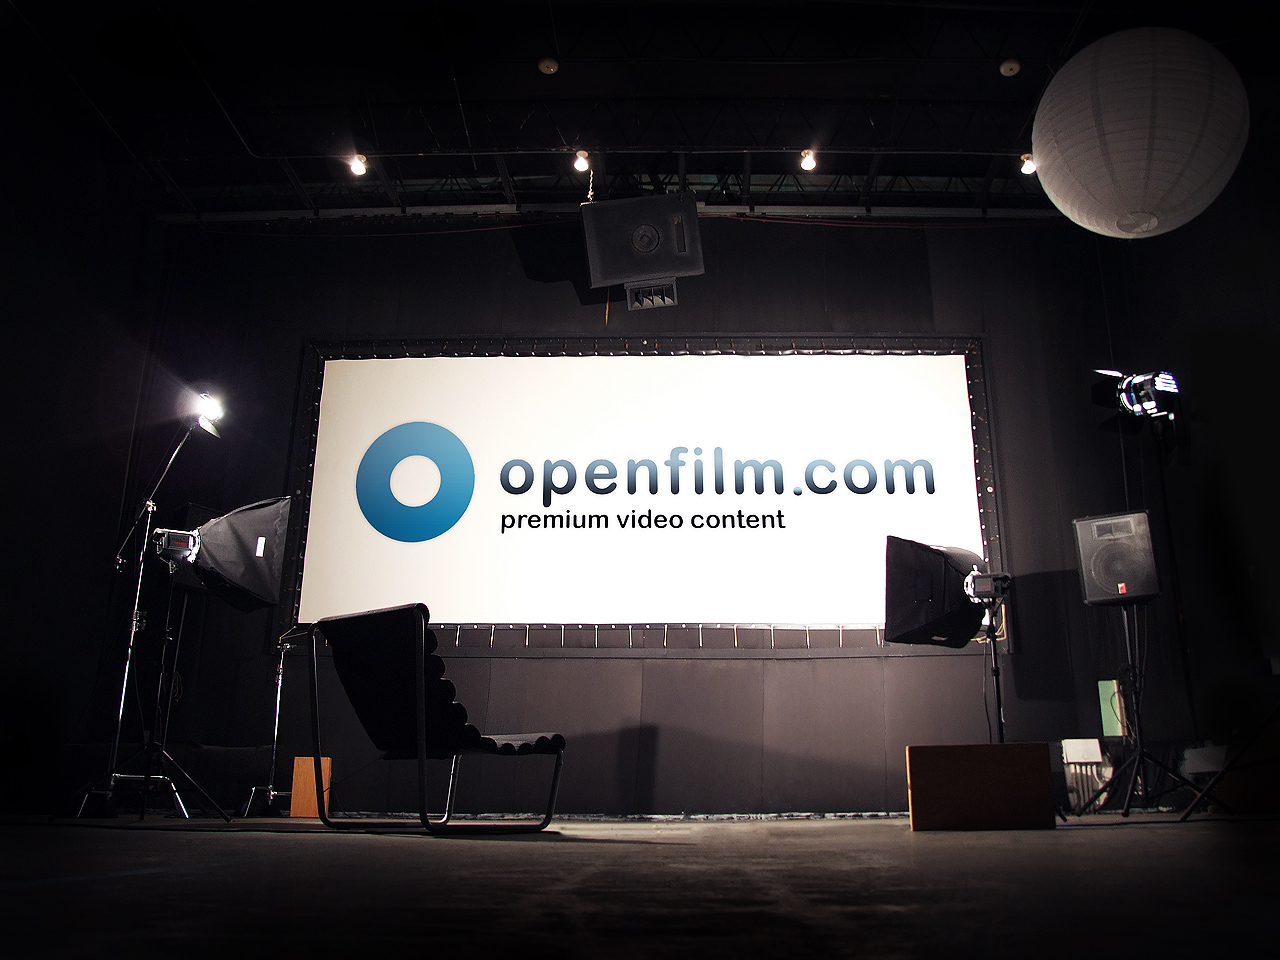 openfilm